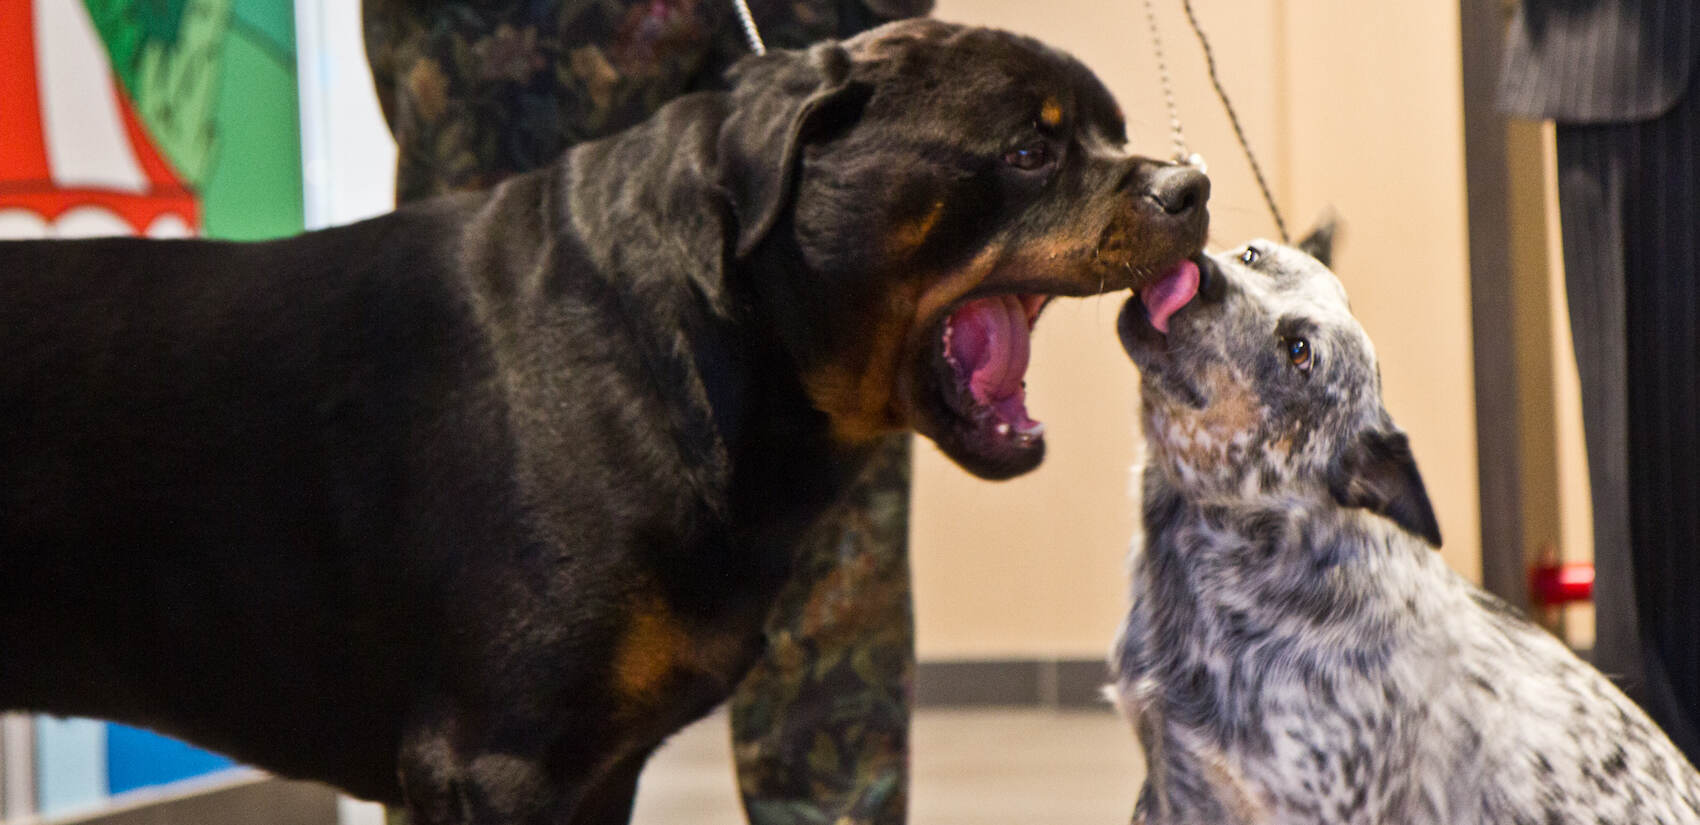 Rottweiler Emmett, a working dog competitor, gets playful with Tootise, an Austrian Cattle dog, who will be competing in the herding category at the 2021 National Dog Show. (Kimberly Paynter/WHYY)